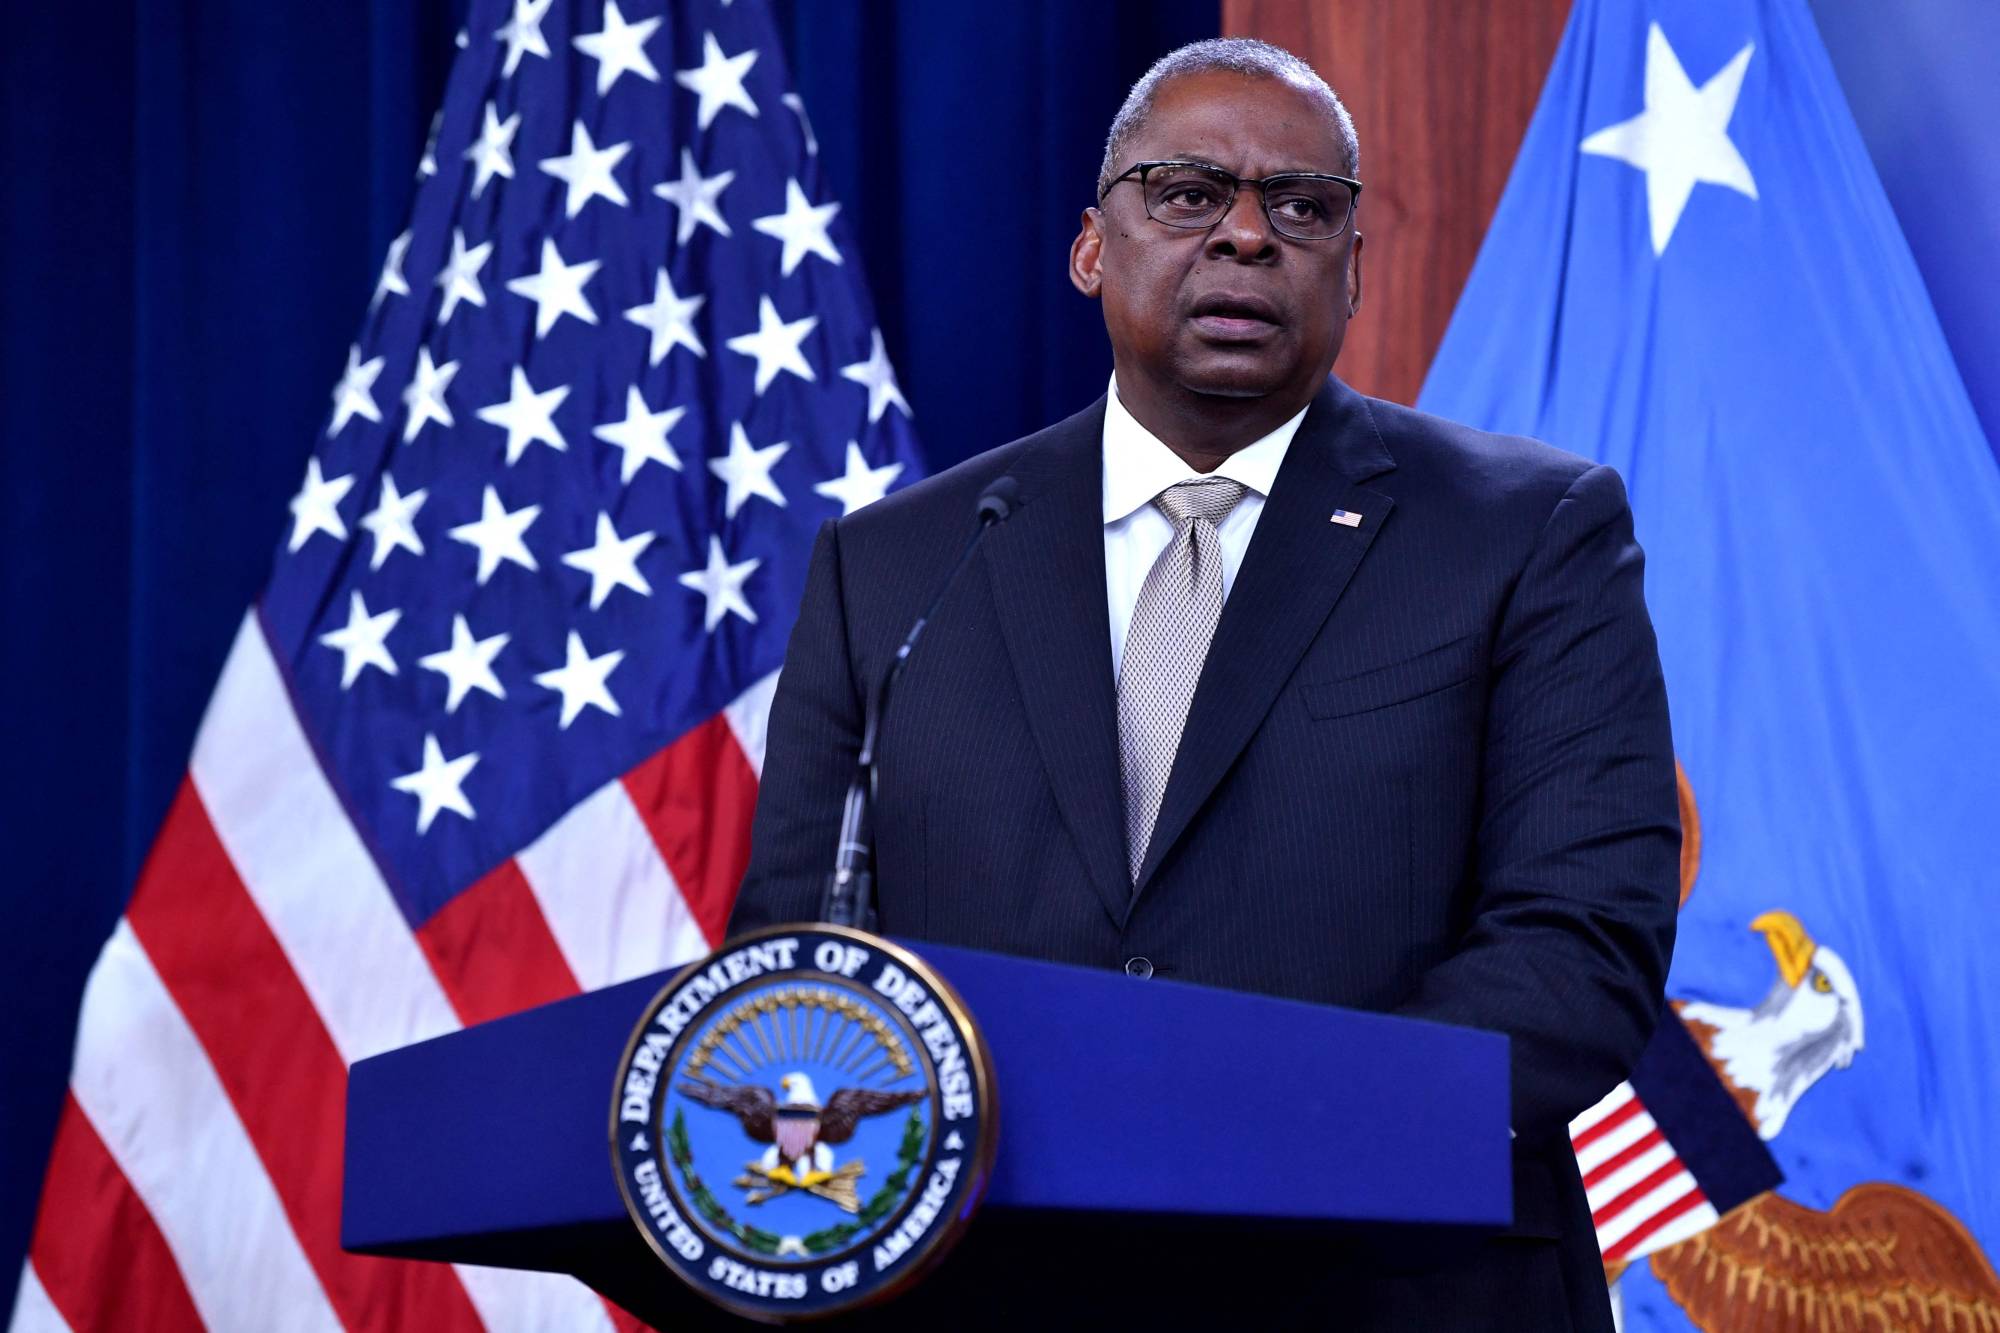 US Defense Secretary Lloyd Austin speaks during a press briefing at the Pentagon in Washington, DC, on May 23, 2022. (Photo by Nicholas Kamm / AFP)